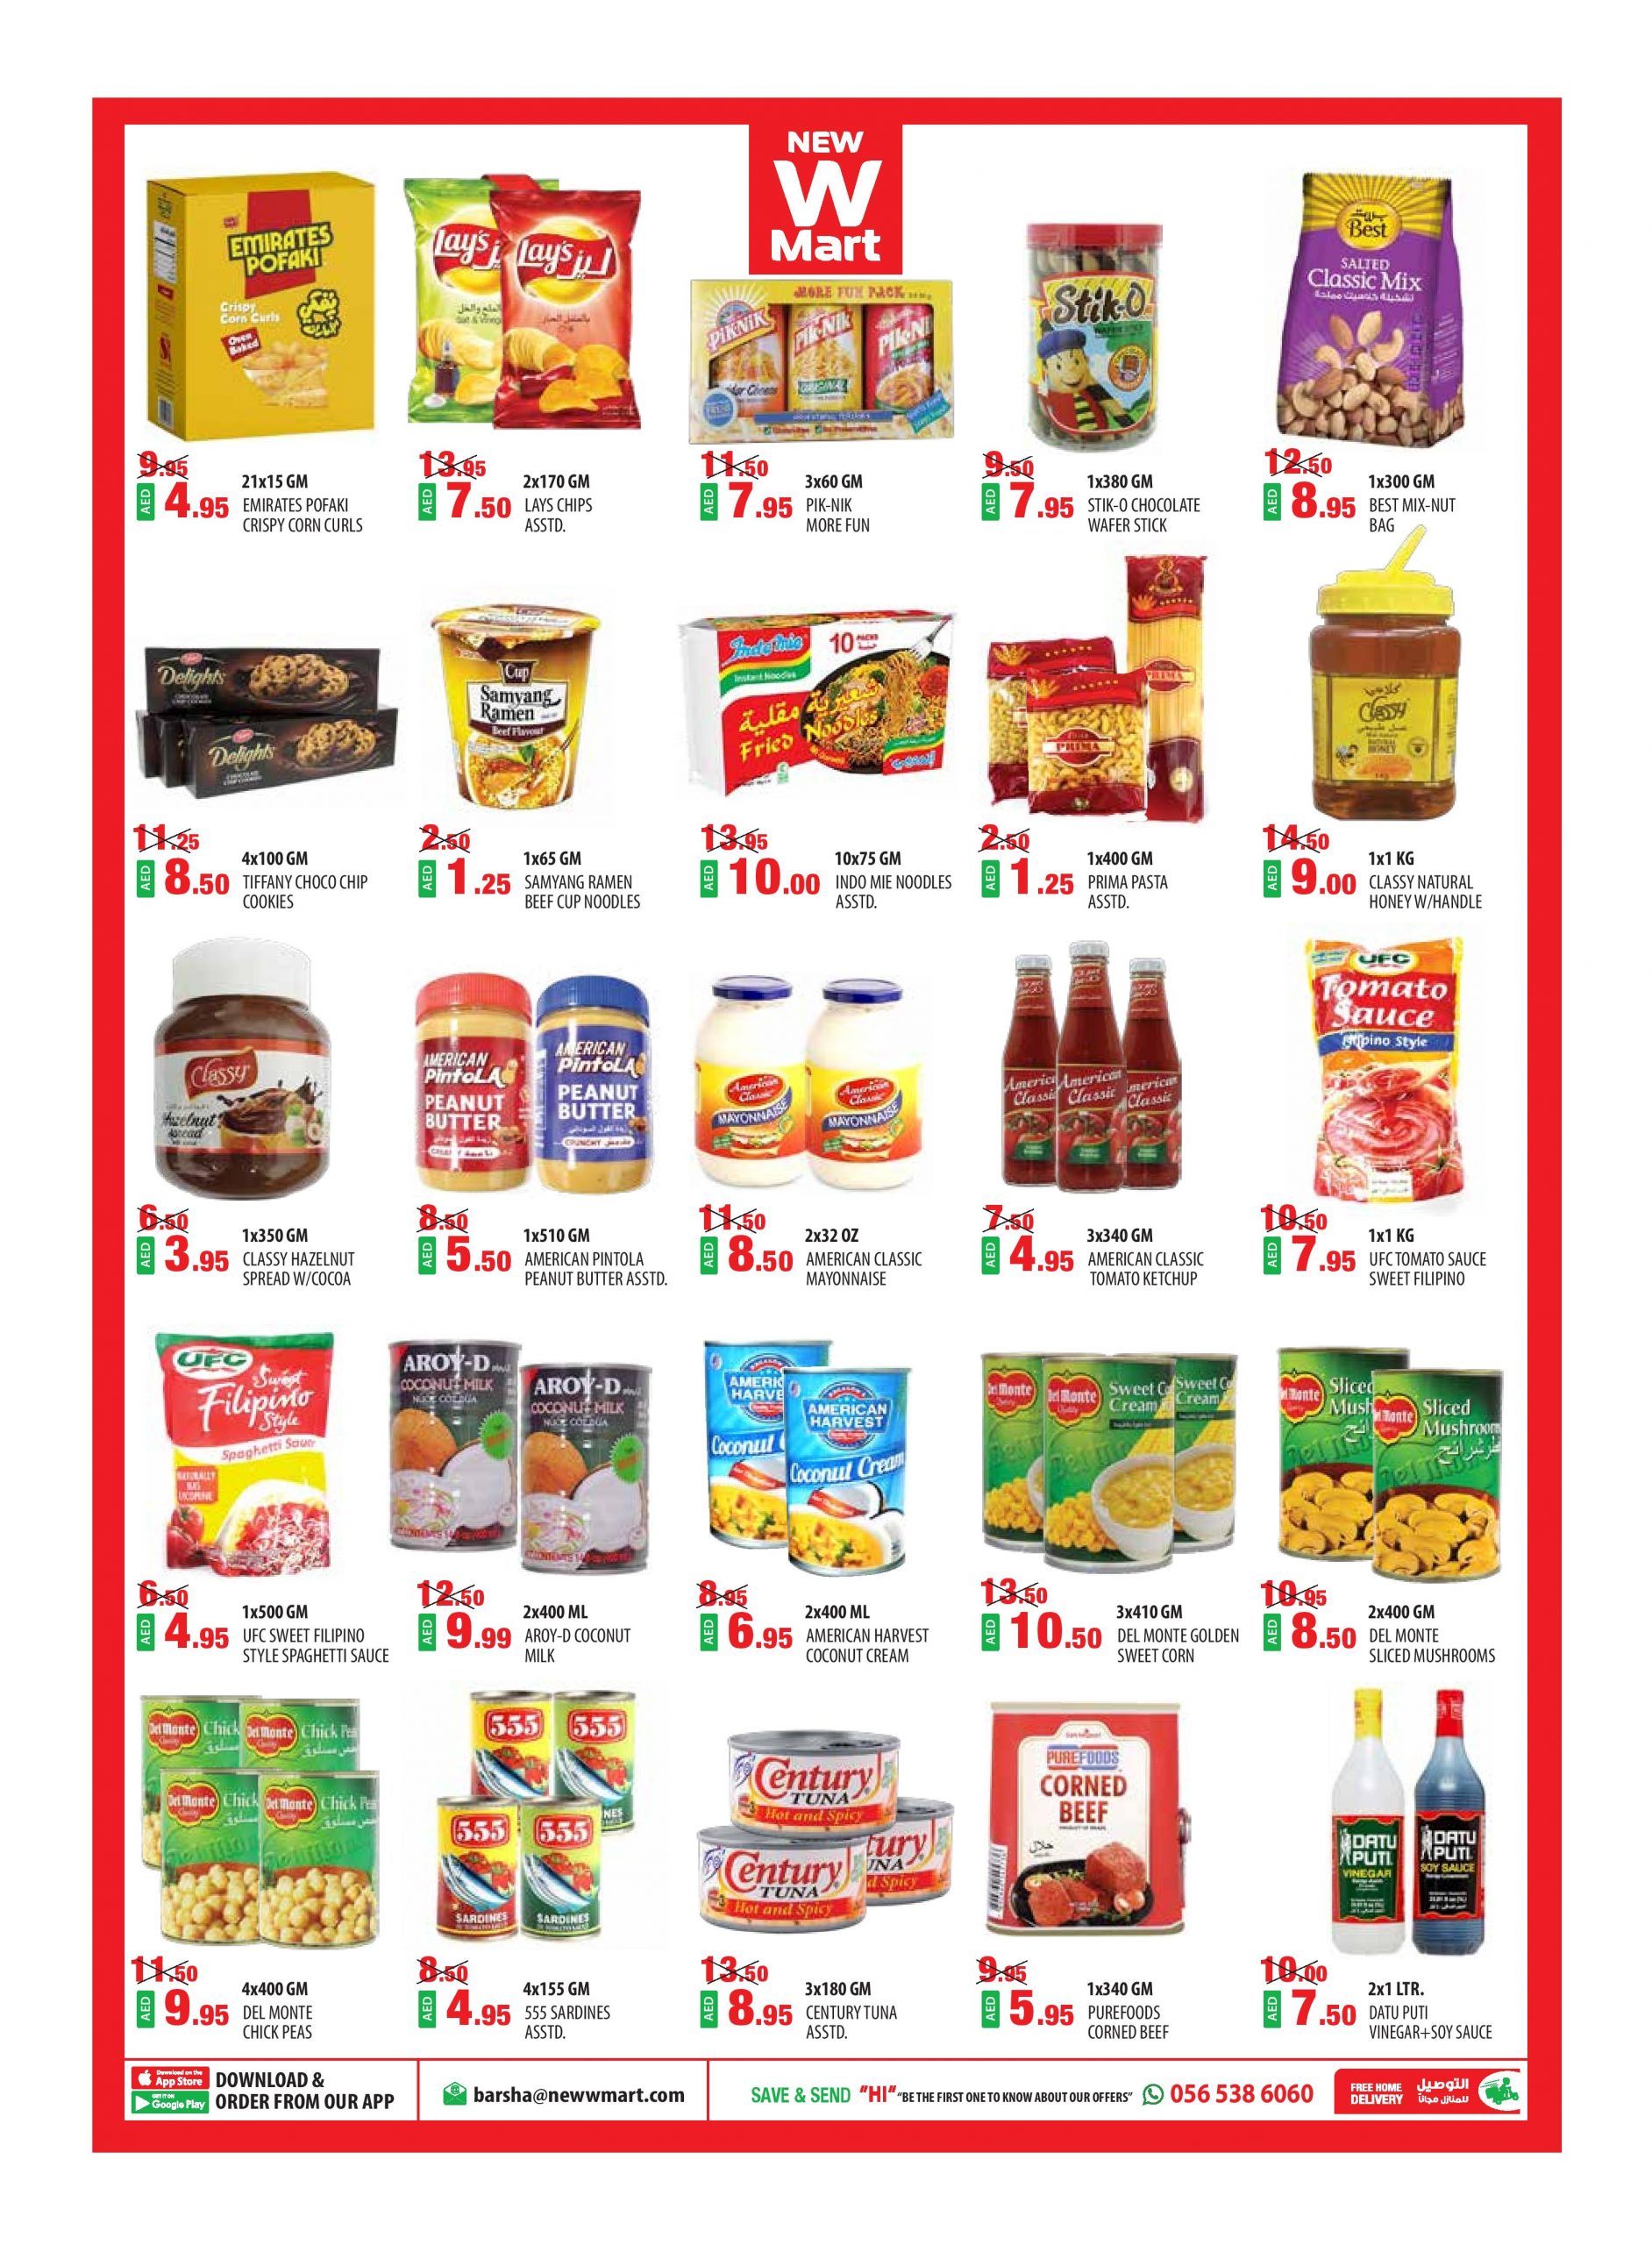 New W Mart September 15 promo Page 3 scaled